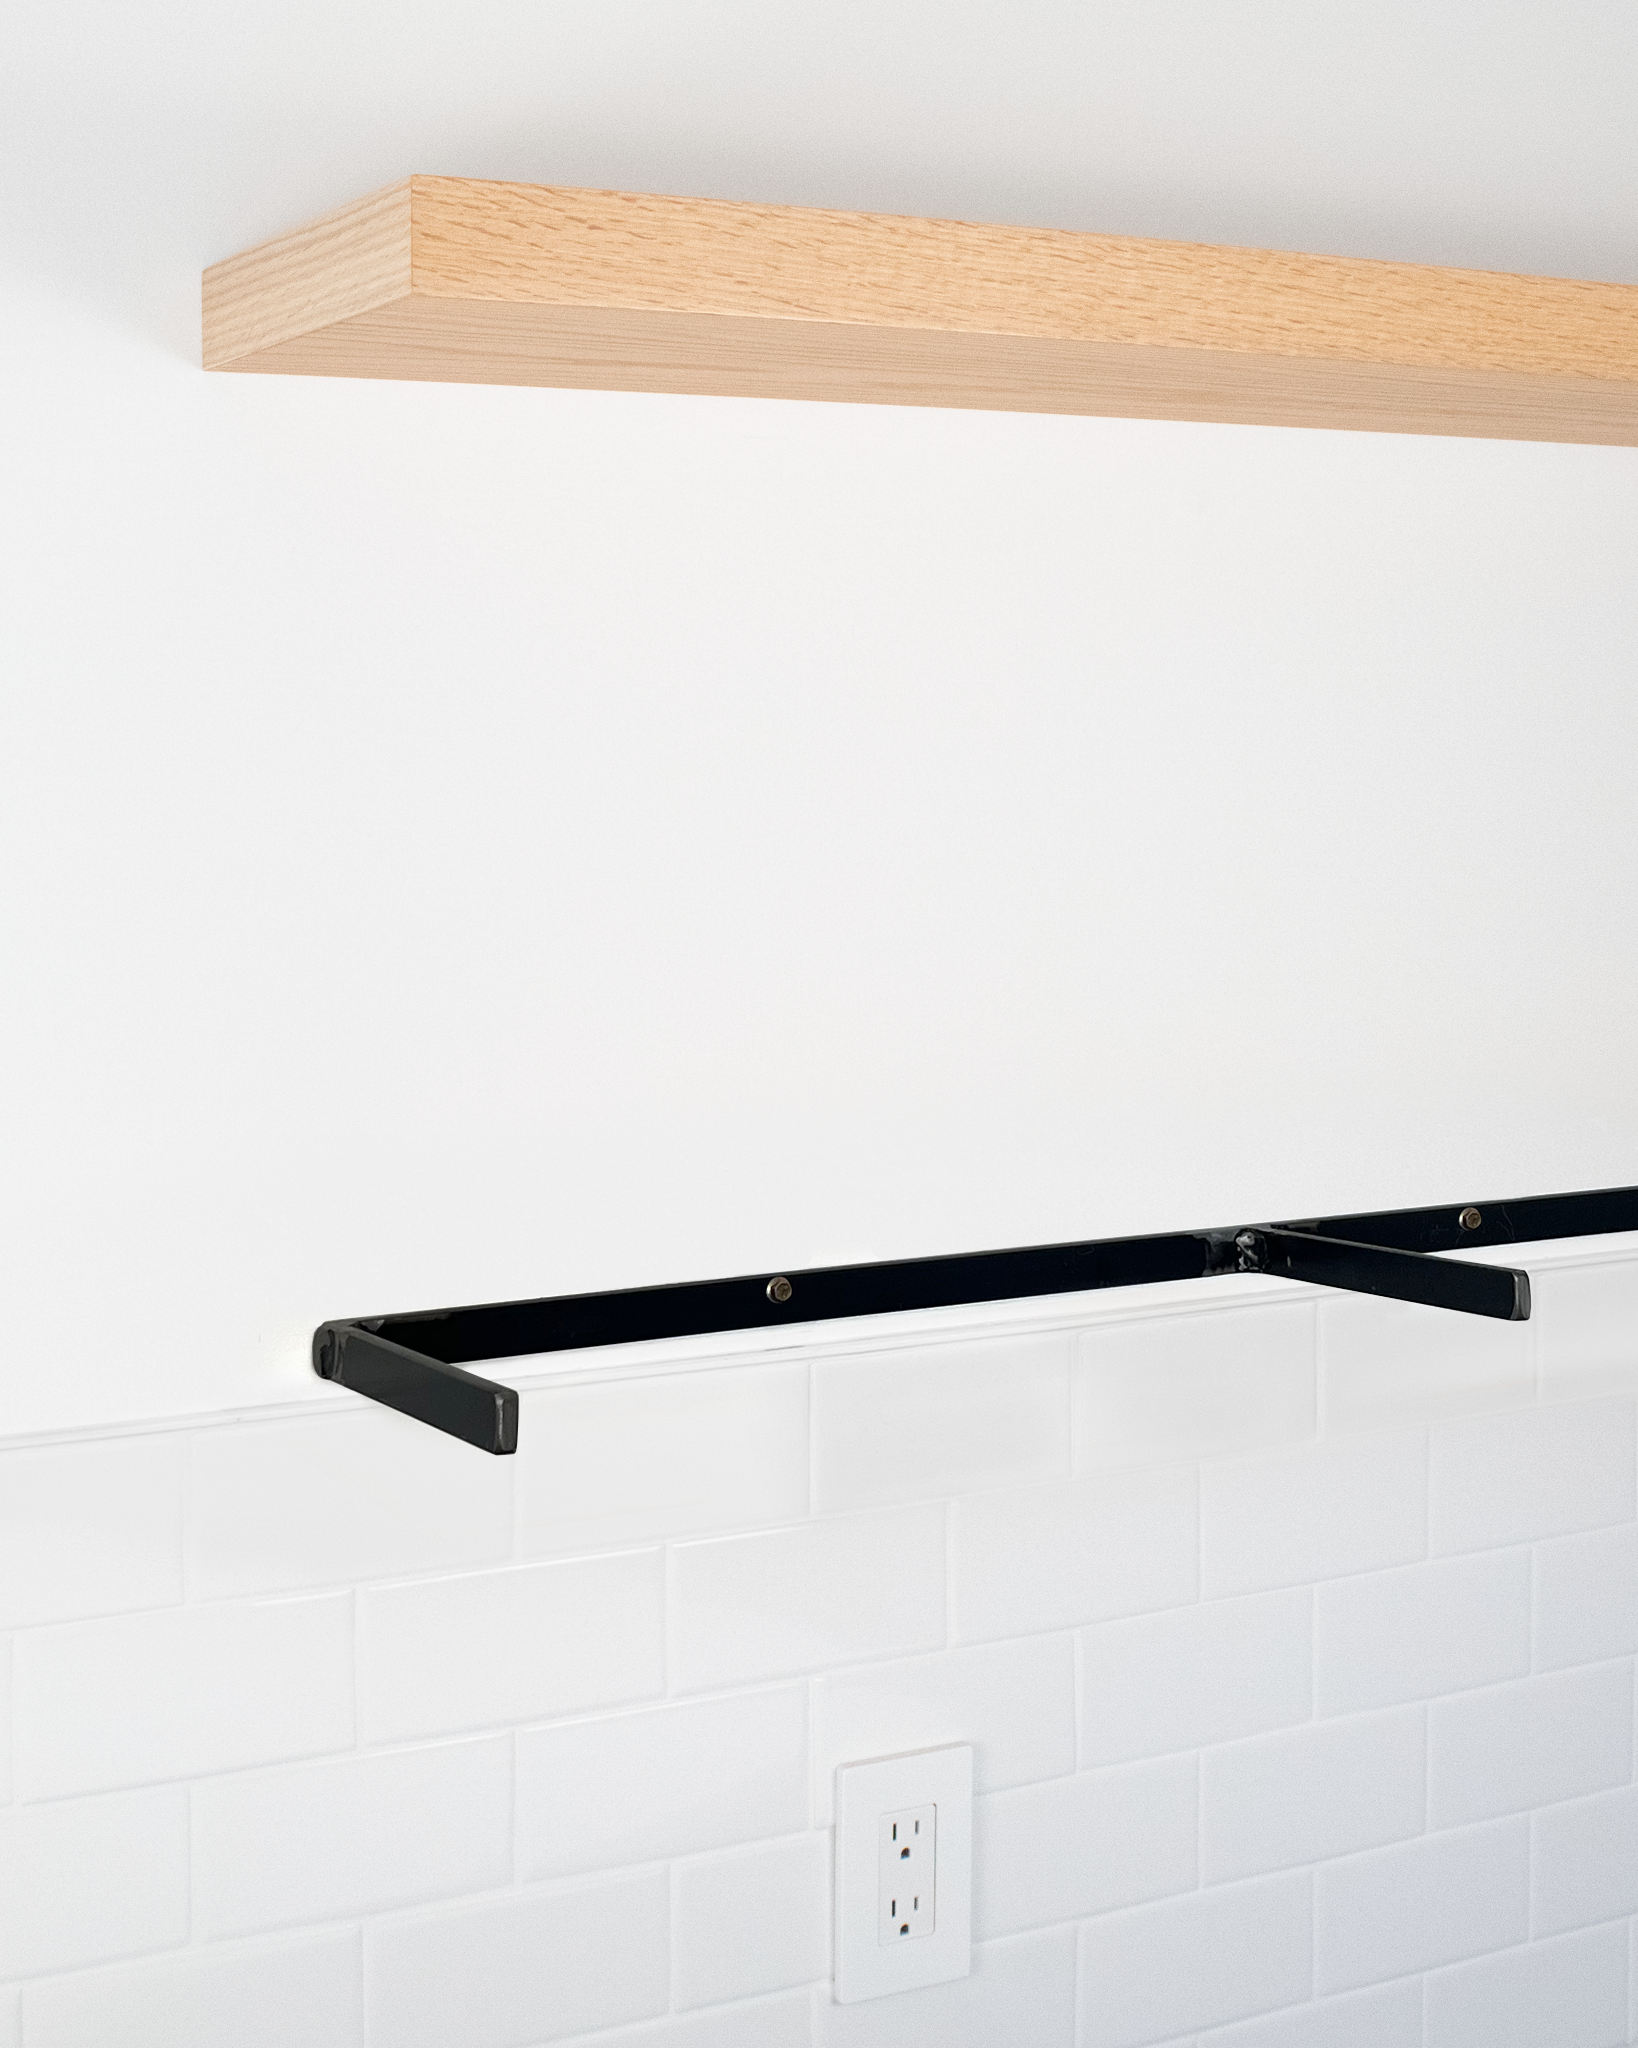 Red Oak Floating Shelves 1.75" thick